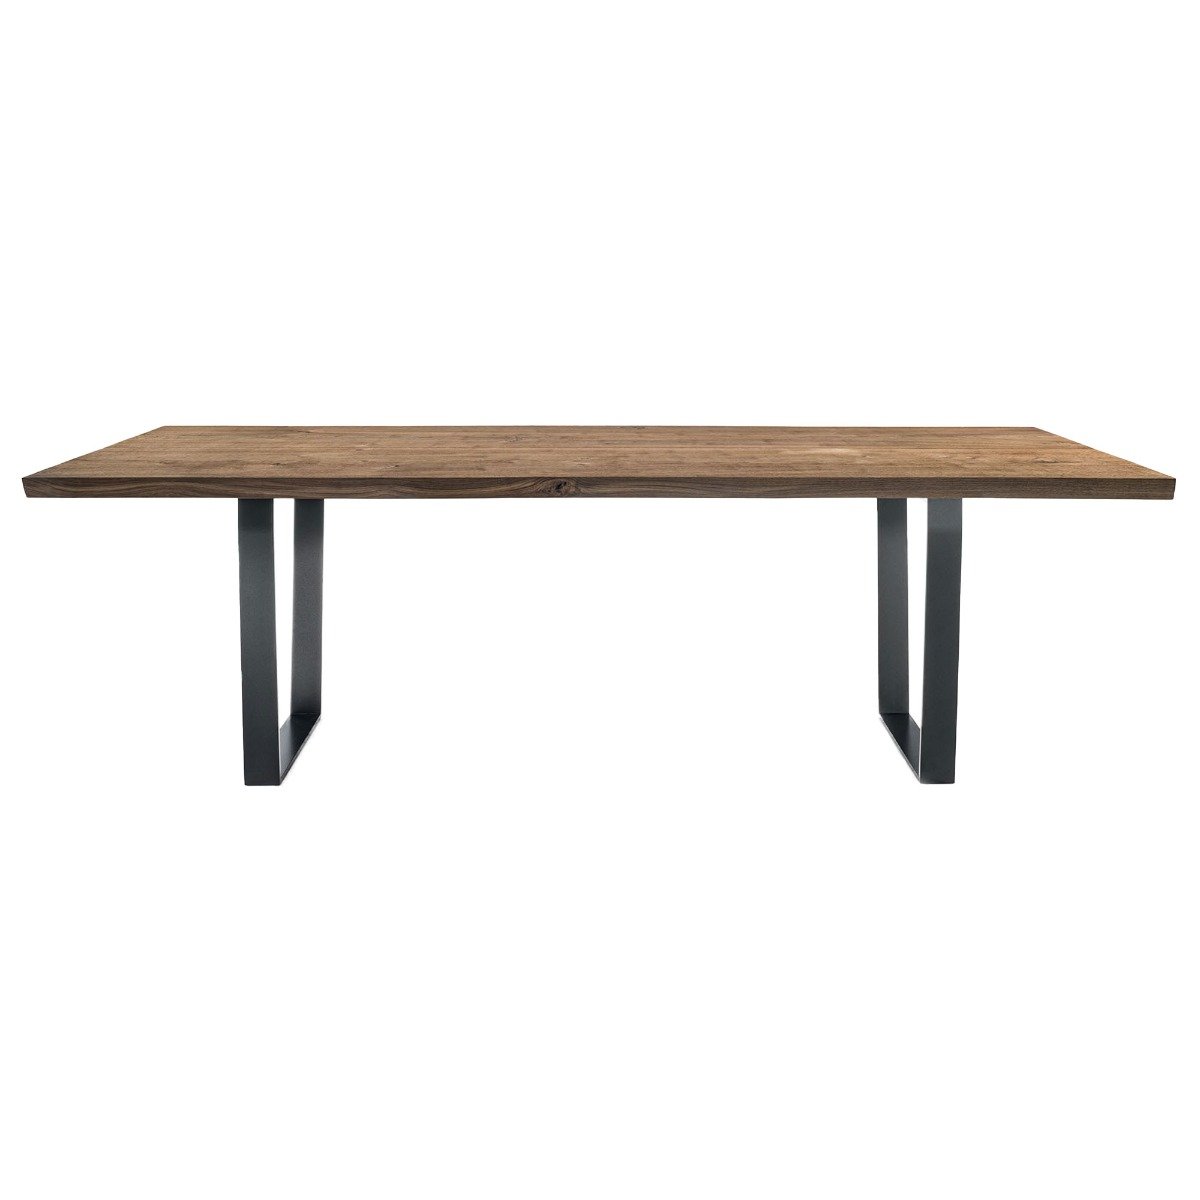 RIVA D.T. Squared Dining Table 240x100cm, Brown | Barker & Stonehouse